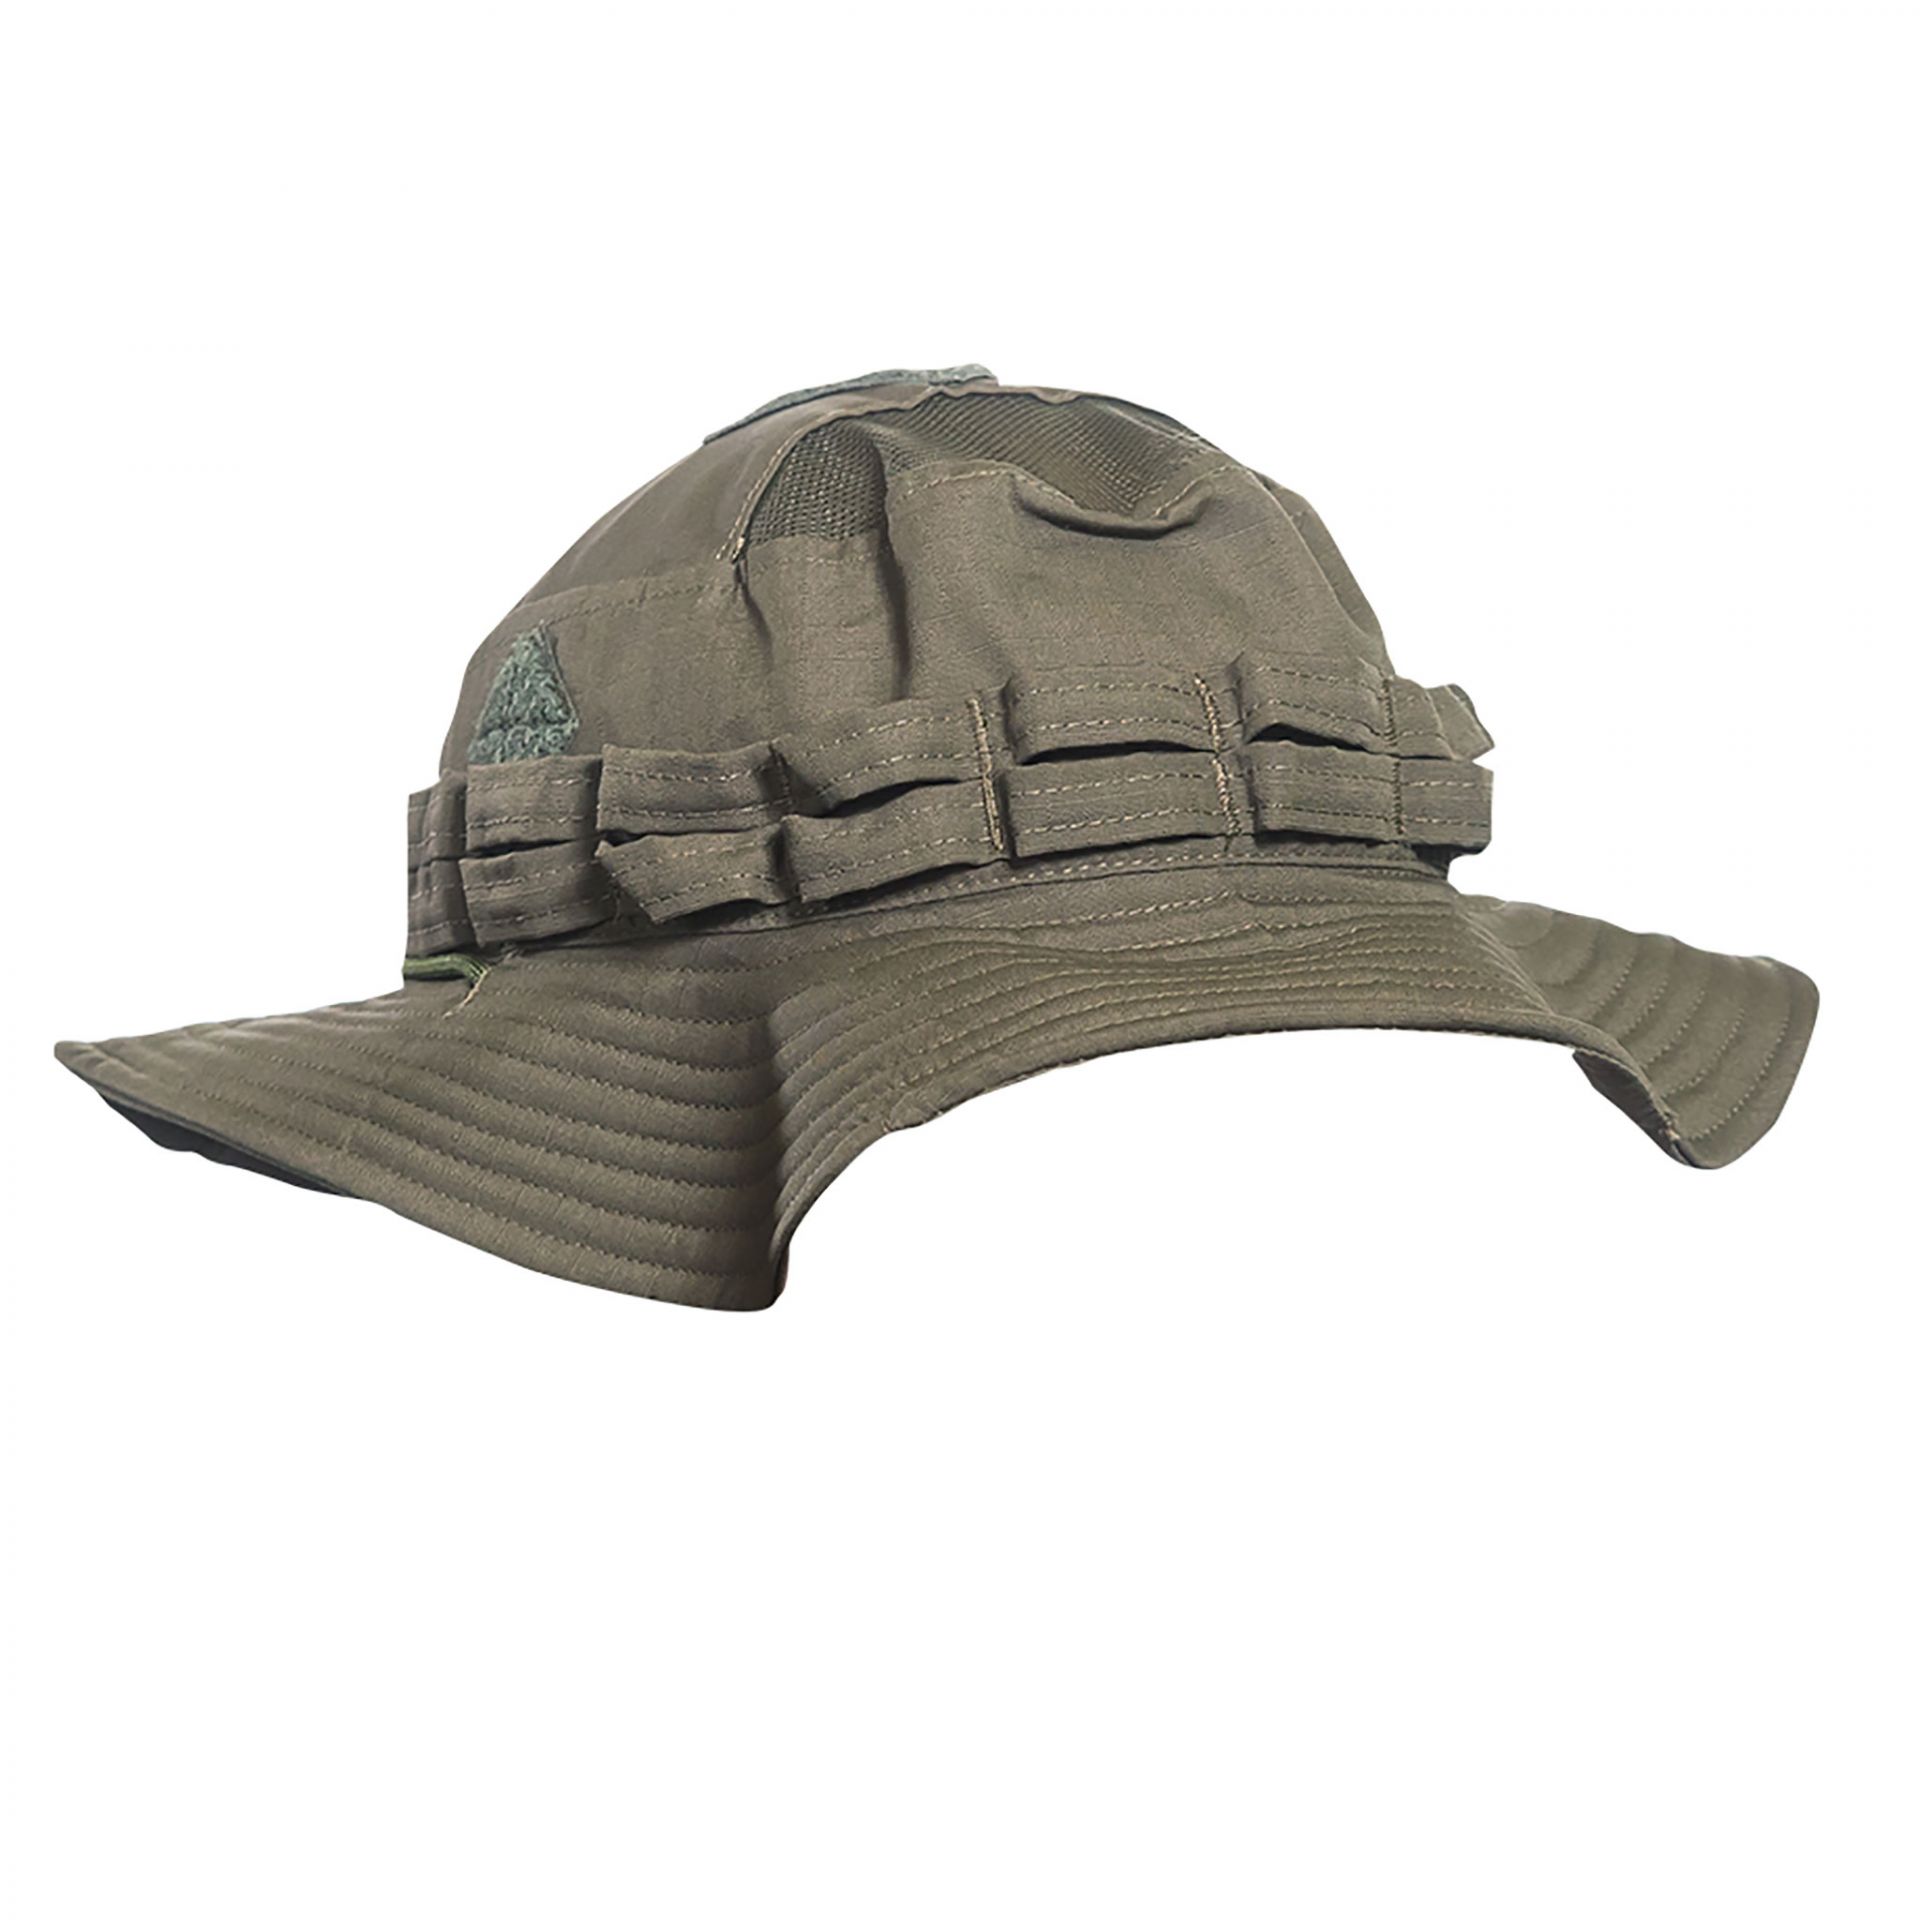 Boonie hat | Sun protection with mesh ventilation | UF PRO